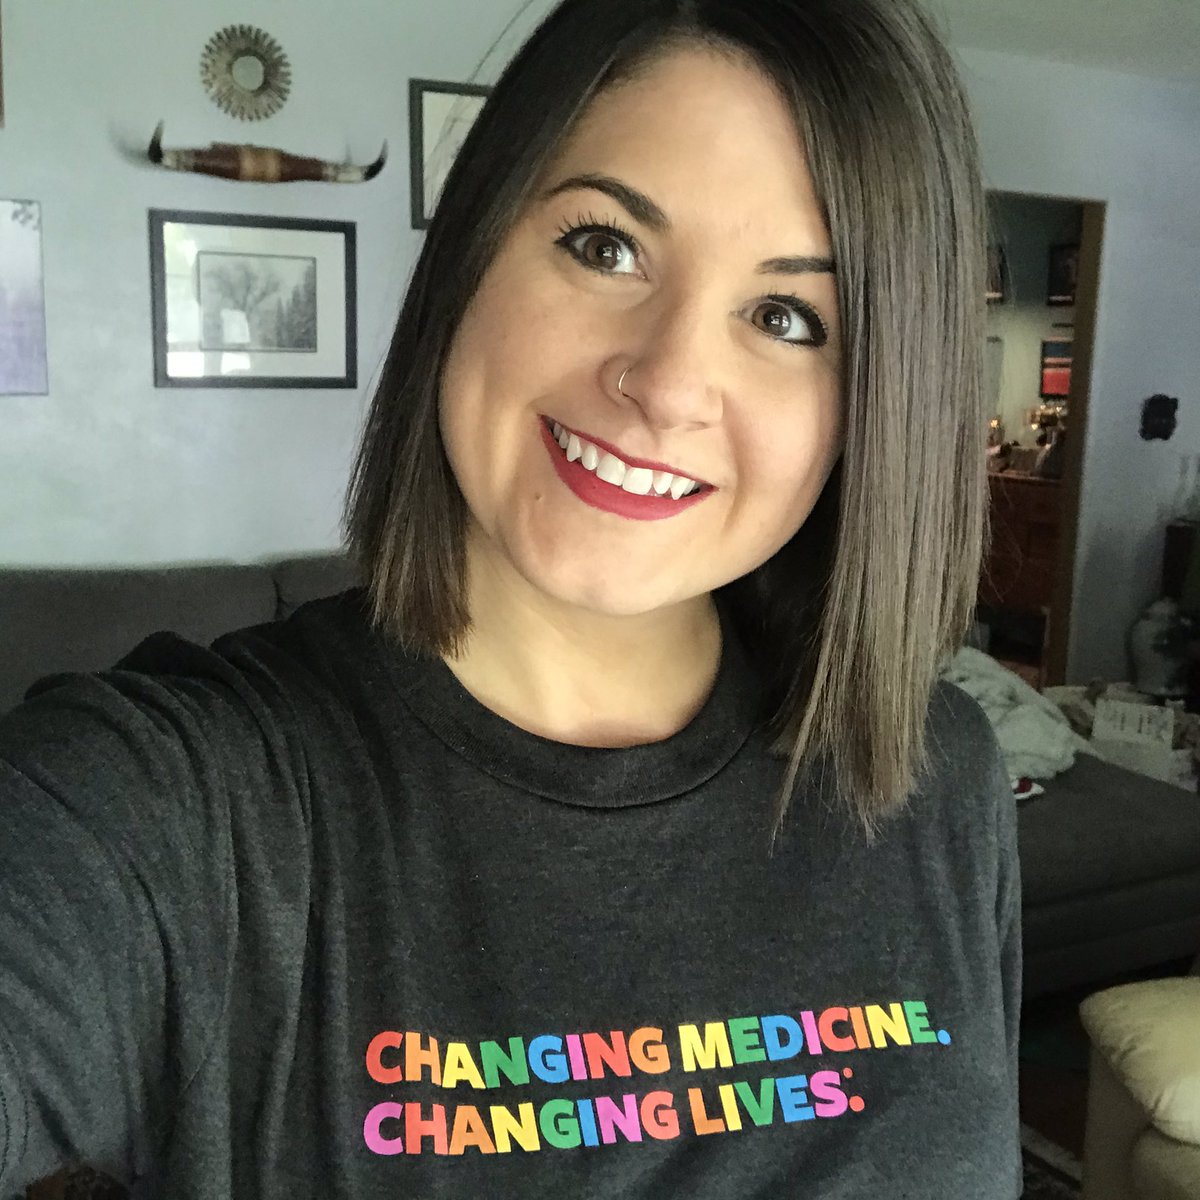 Check out my new @uihealthcare pride shirt! Proud to work for an inclusive organization!! #changingmedicinechanginglives #pridemonth #healthcare ❤️❤️❤️❤️